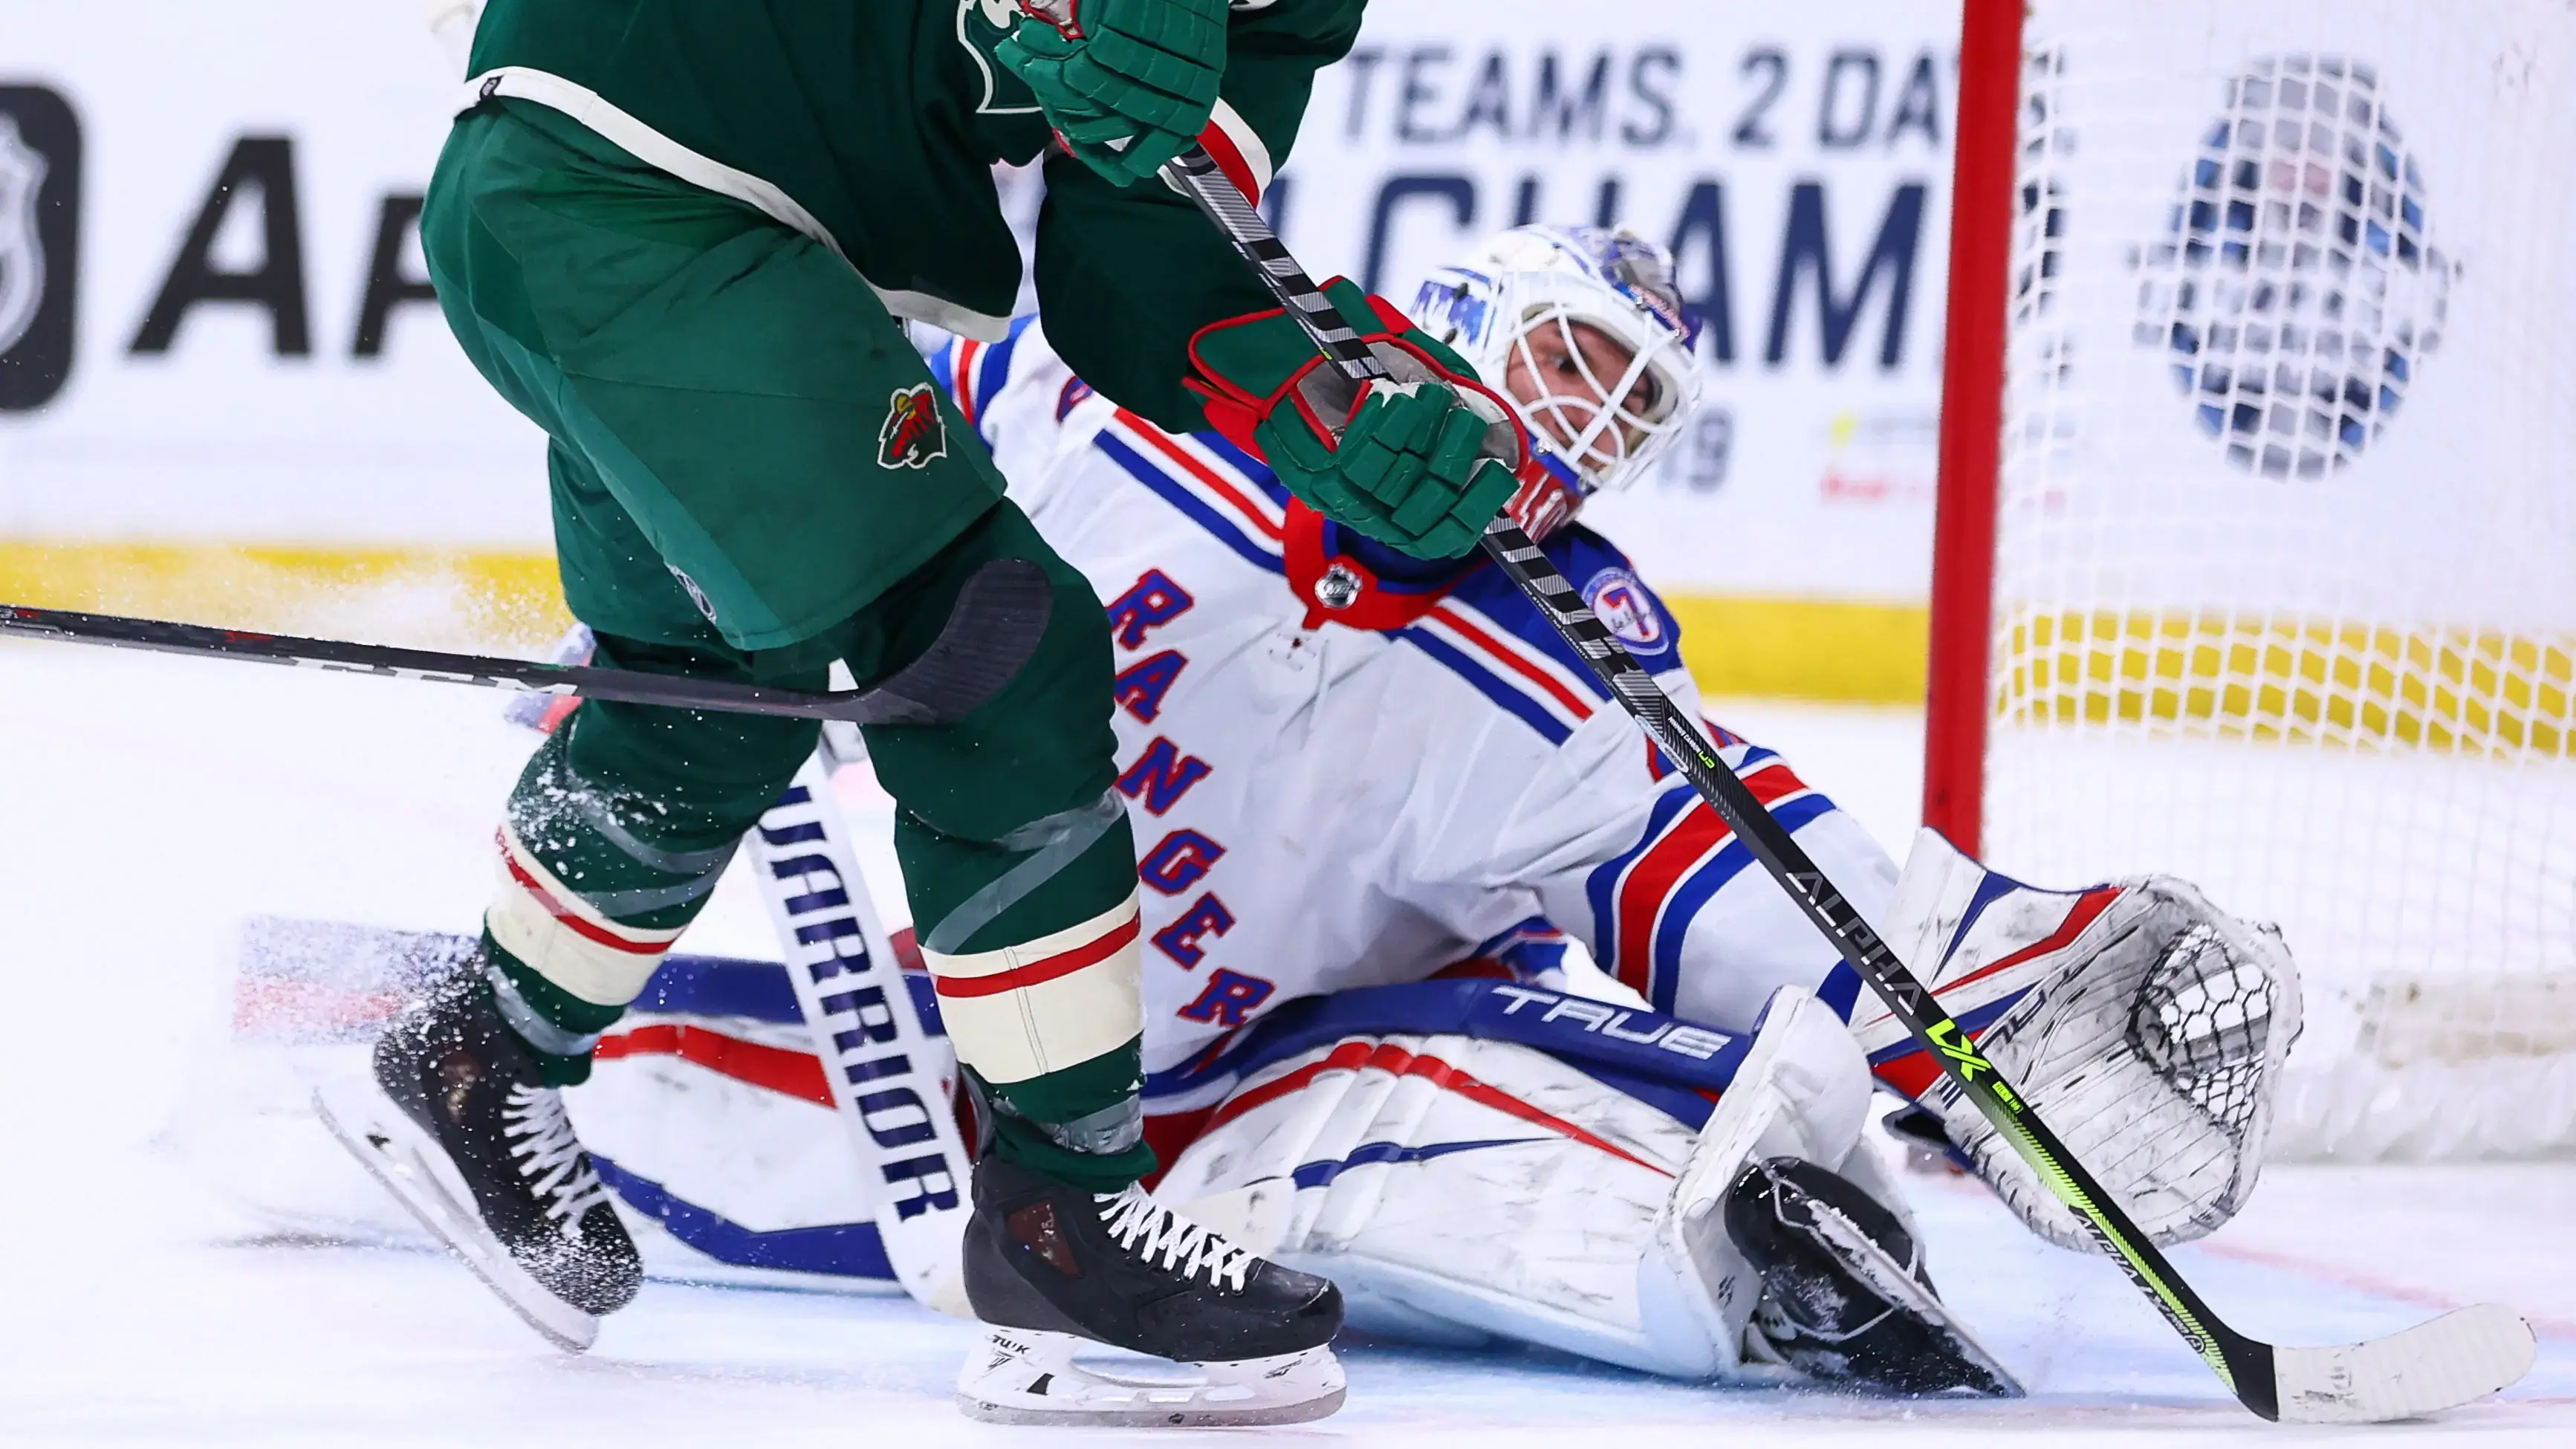 Mar 8, 2022; Saint Paul, Minnesota, USA; Minnesota Wild left wing Marcus Foligno (17) scores a goal against the New York Rangers during the second period at Xcel Energy Center. / Harrison Barden-USA TODAY Sports